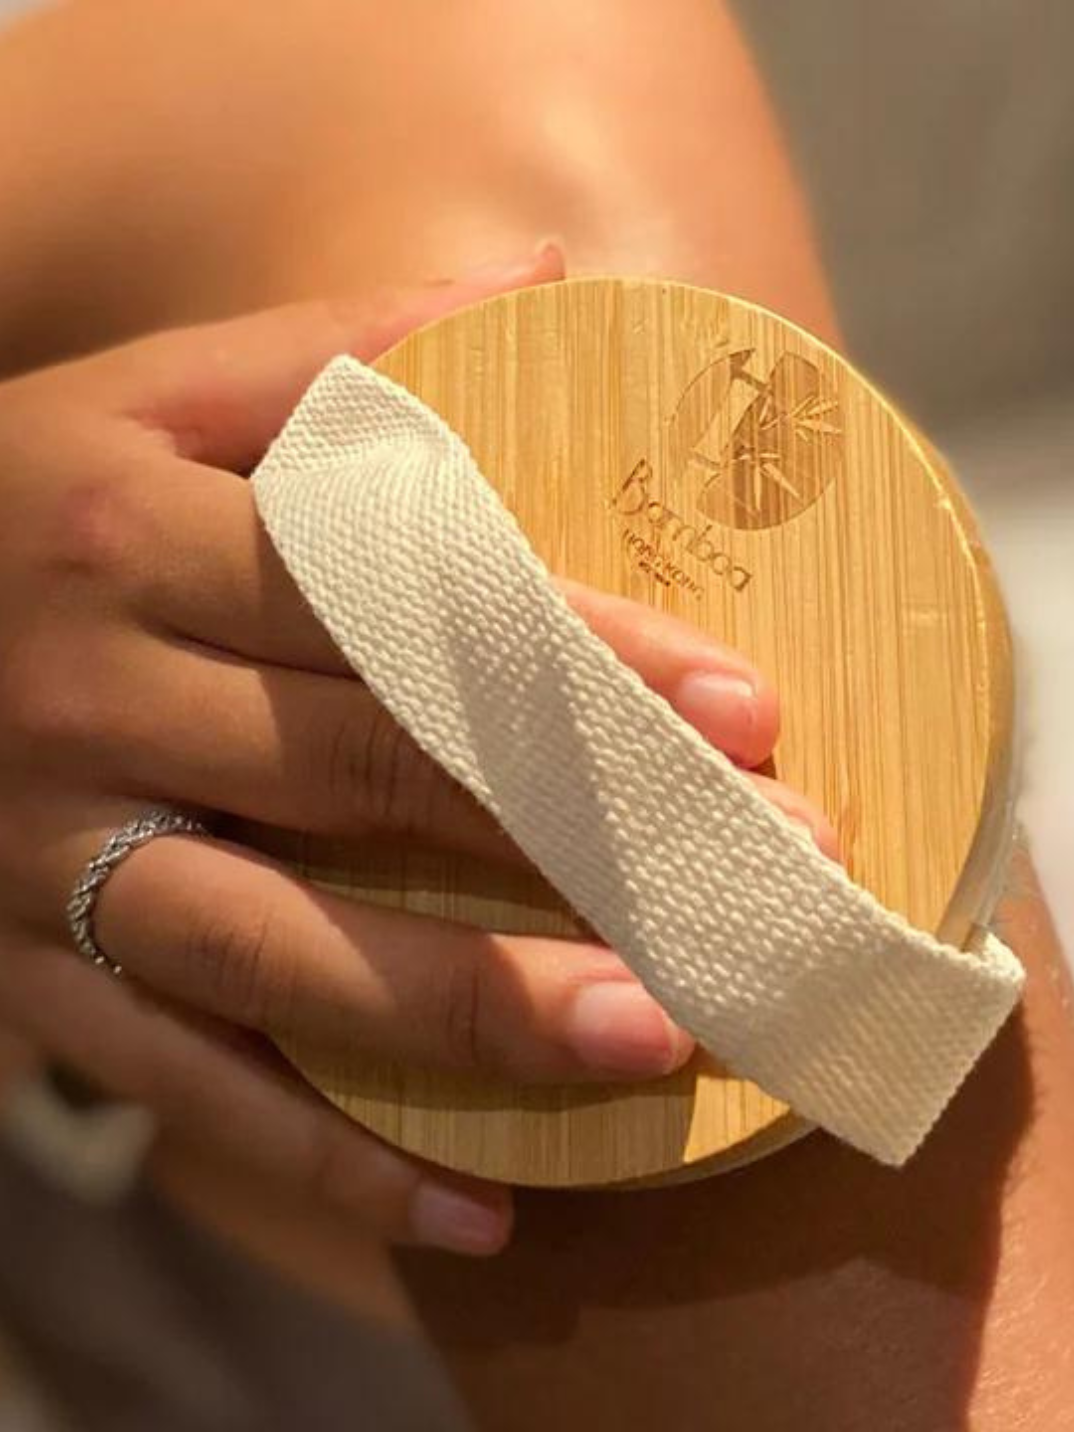 This bamboo dry brush is perfect for giving yourself an at-home massage and can help exfoliate + firm your skin!